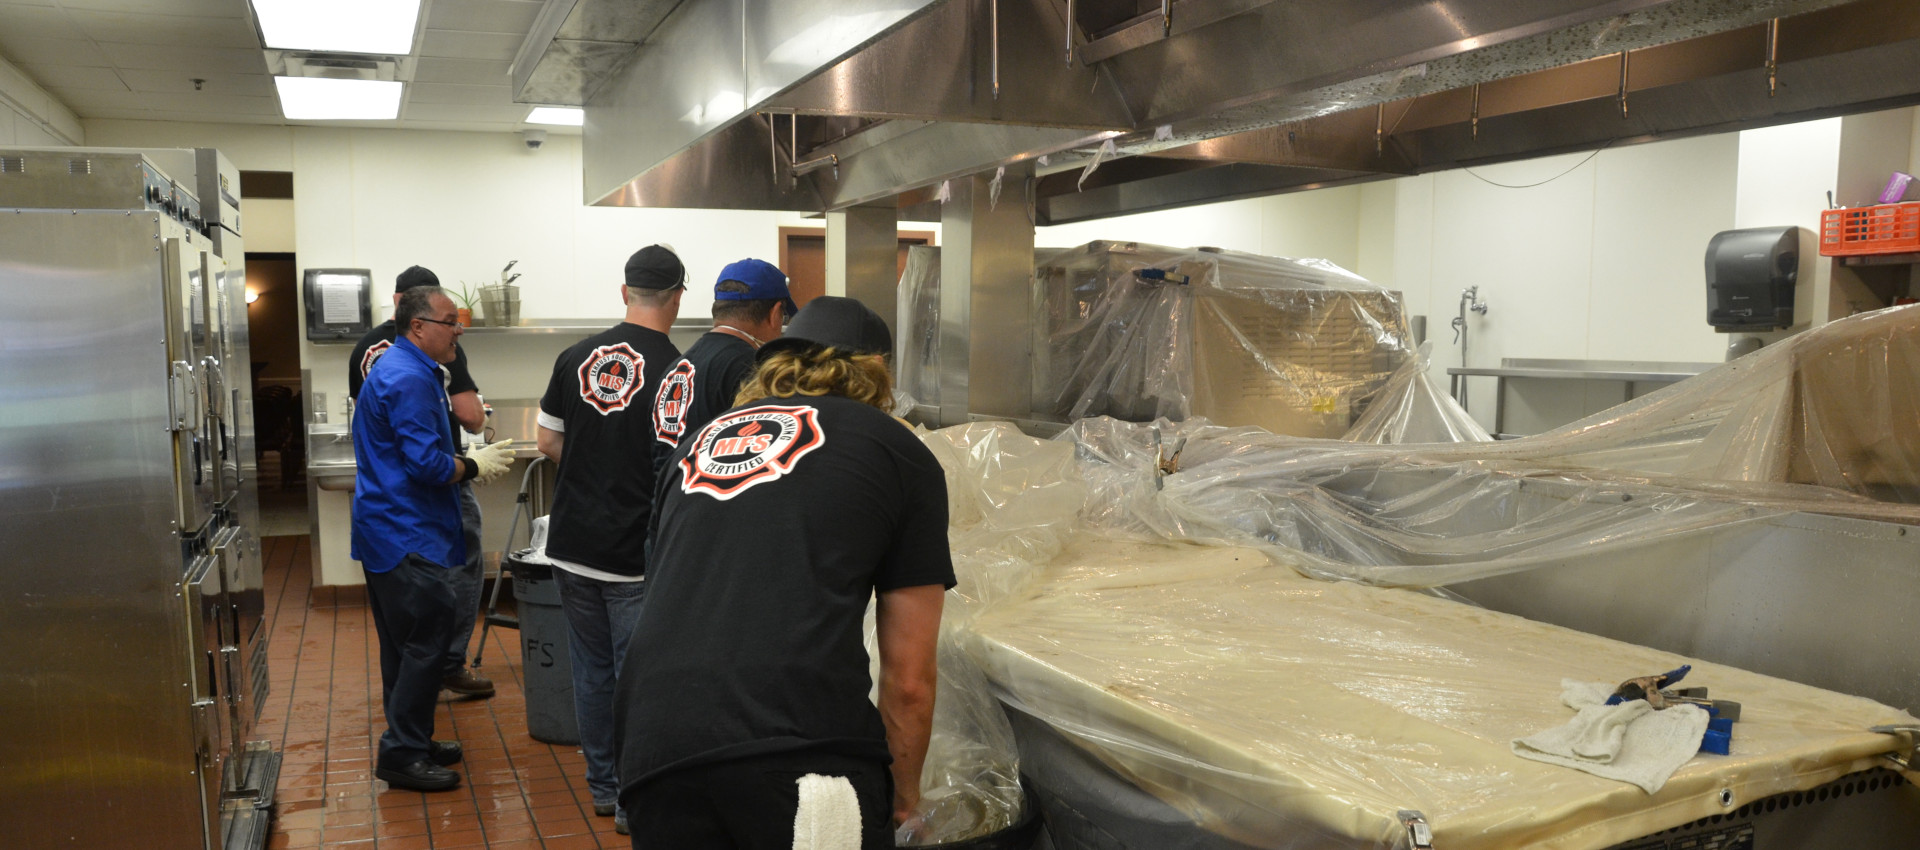 Exhaust Hood Cleaning Training & Certification